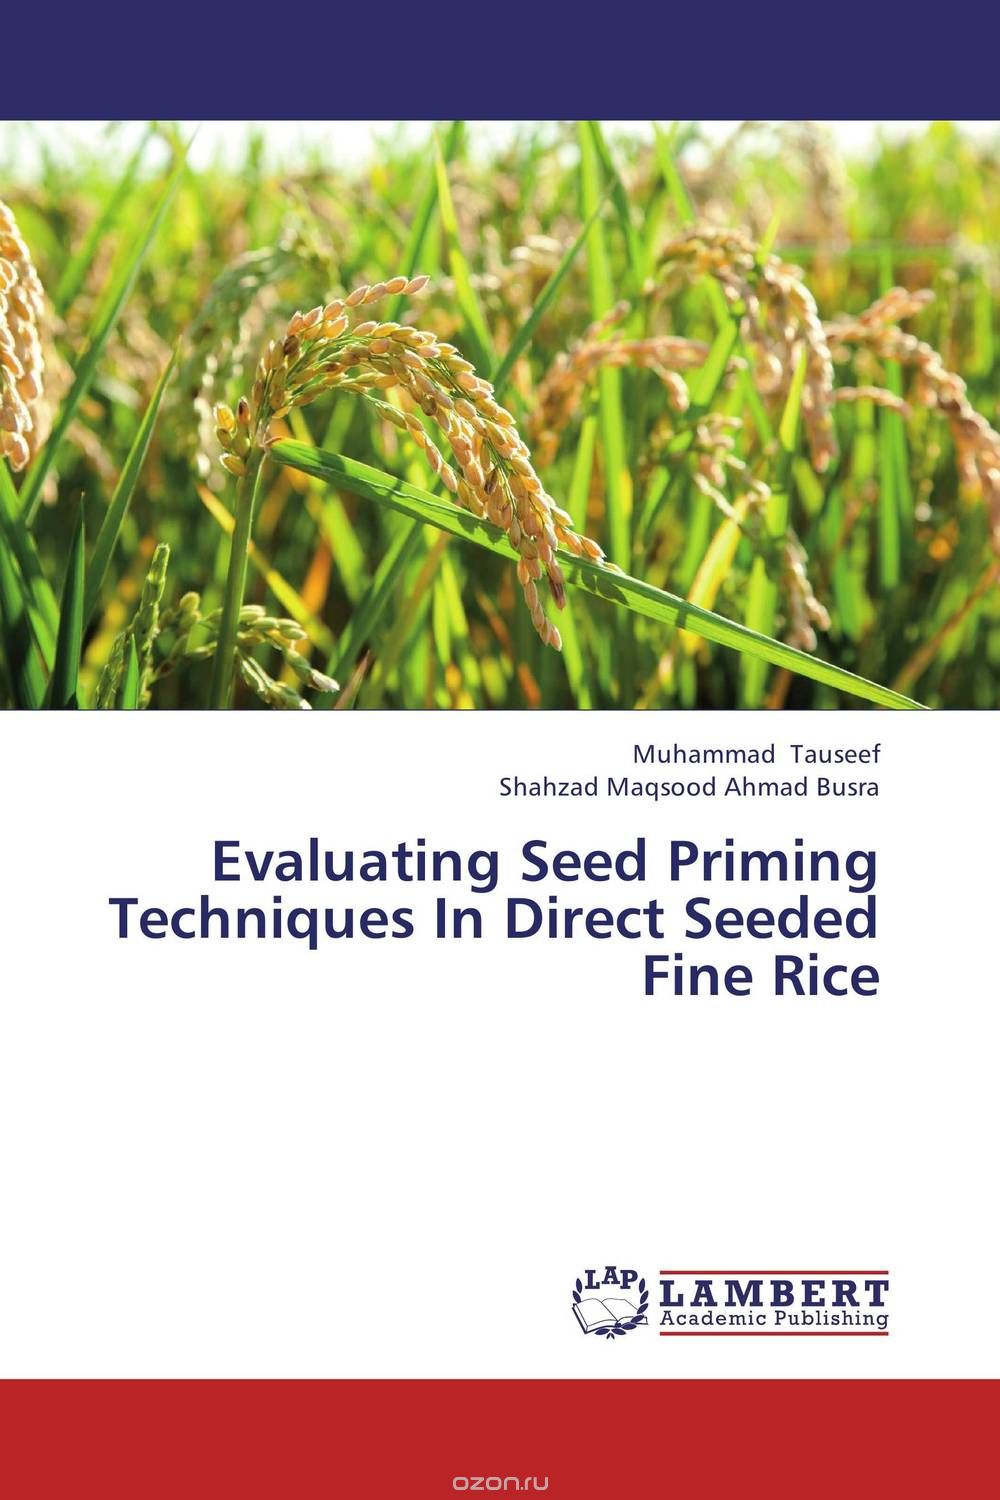 Скачать книгу "Evaluating Seed Priming Techniques In Direct Seeded Fine Rice"